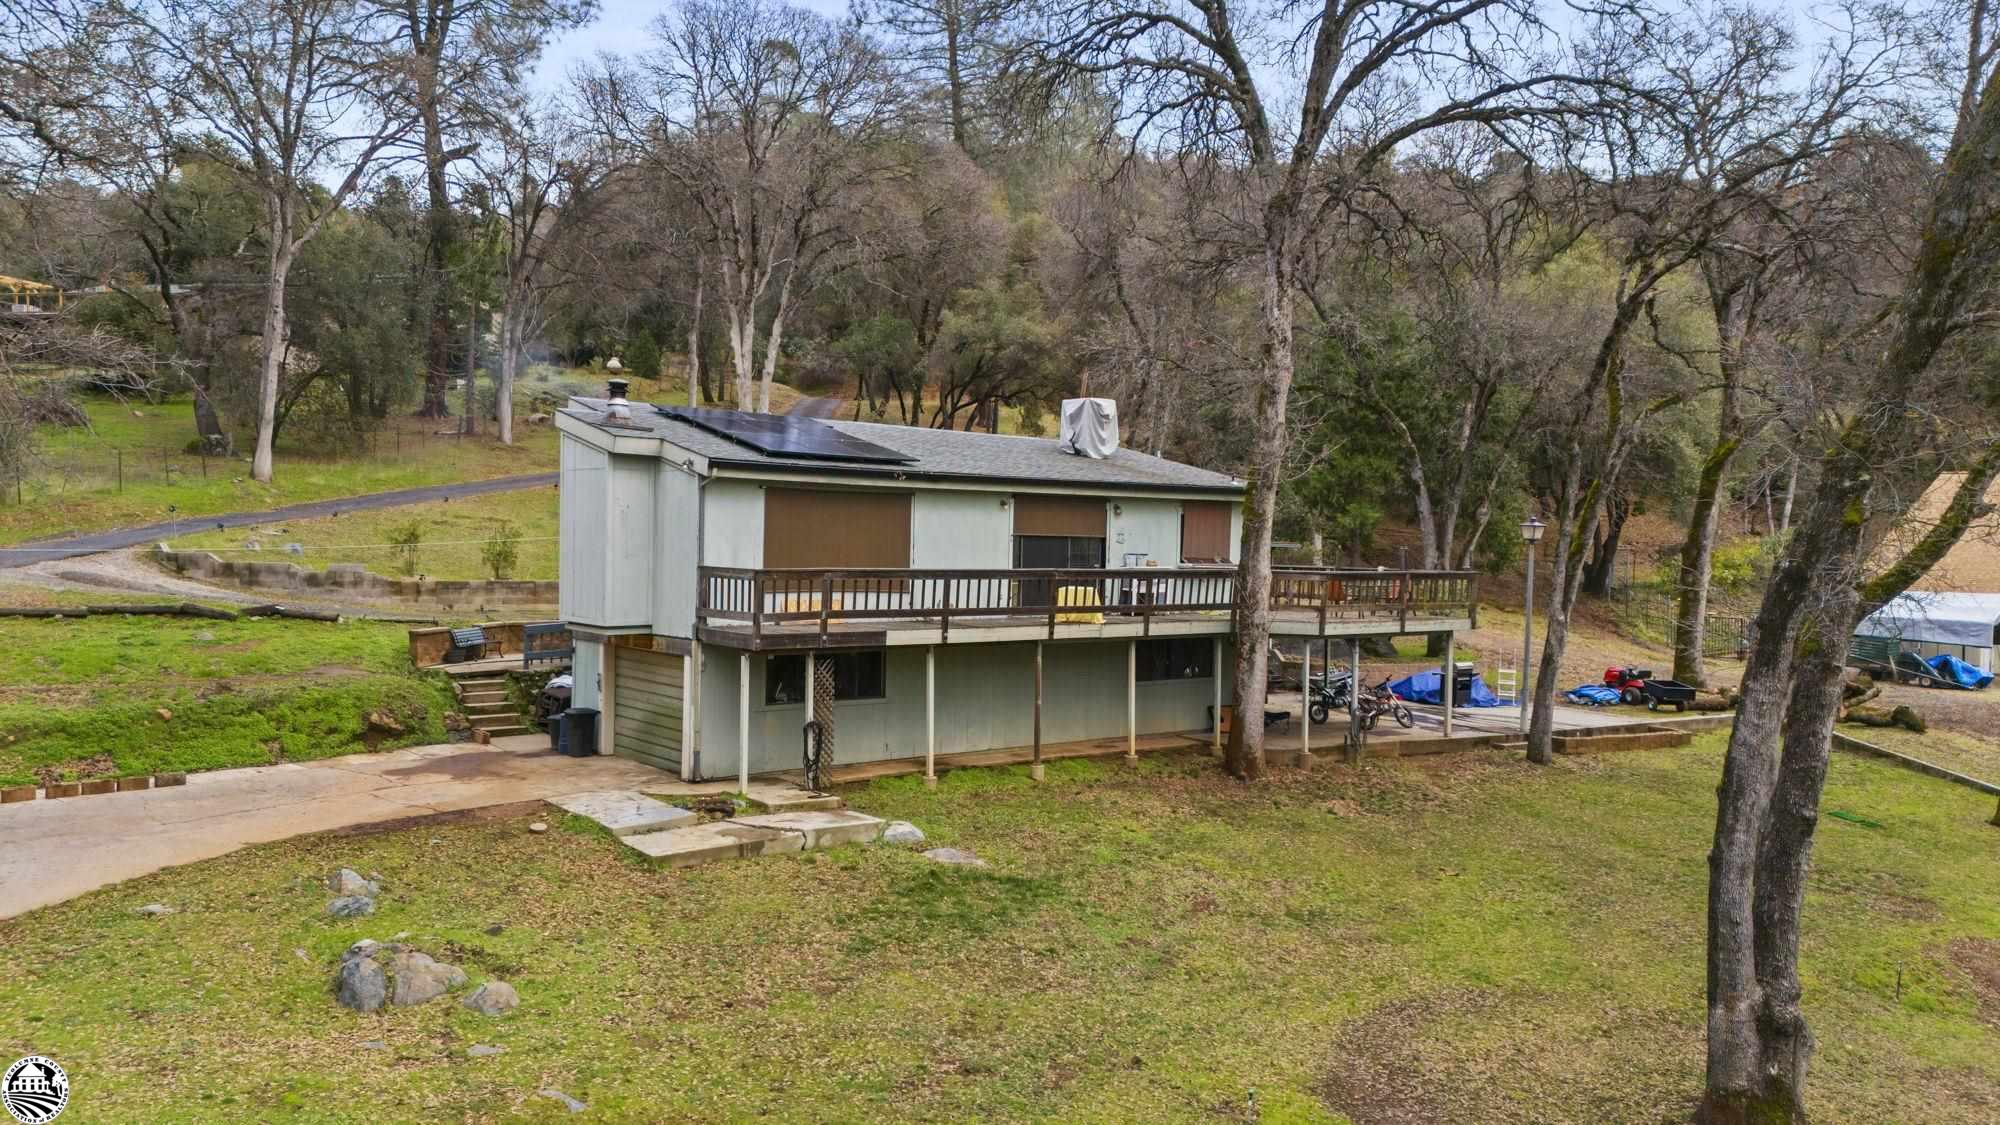 Photo of 20300 Midland Rd in Sonora, CA